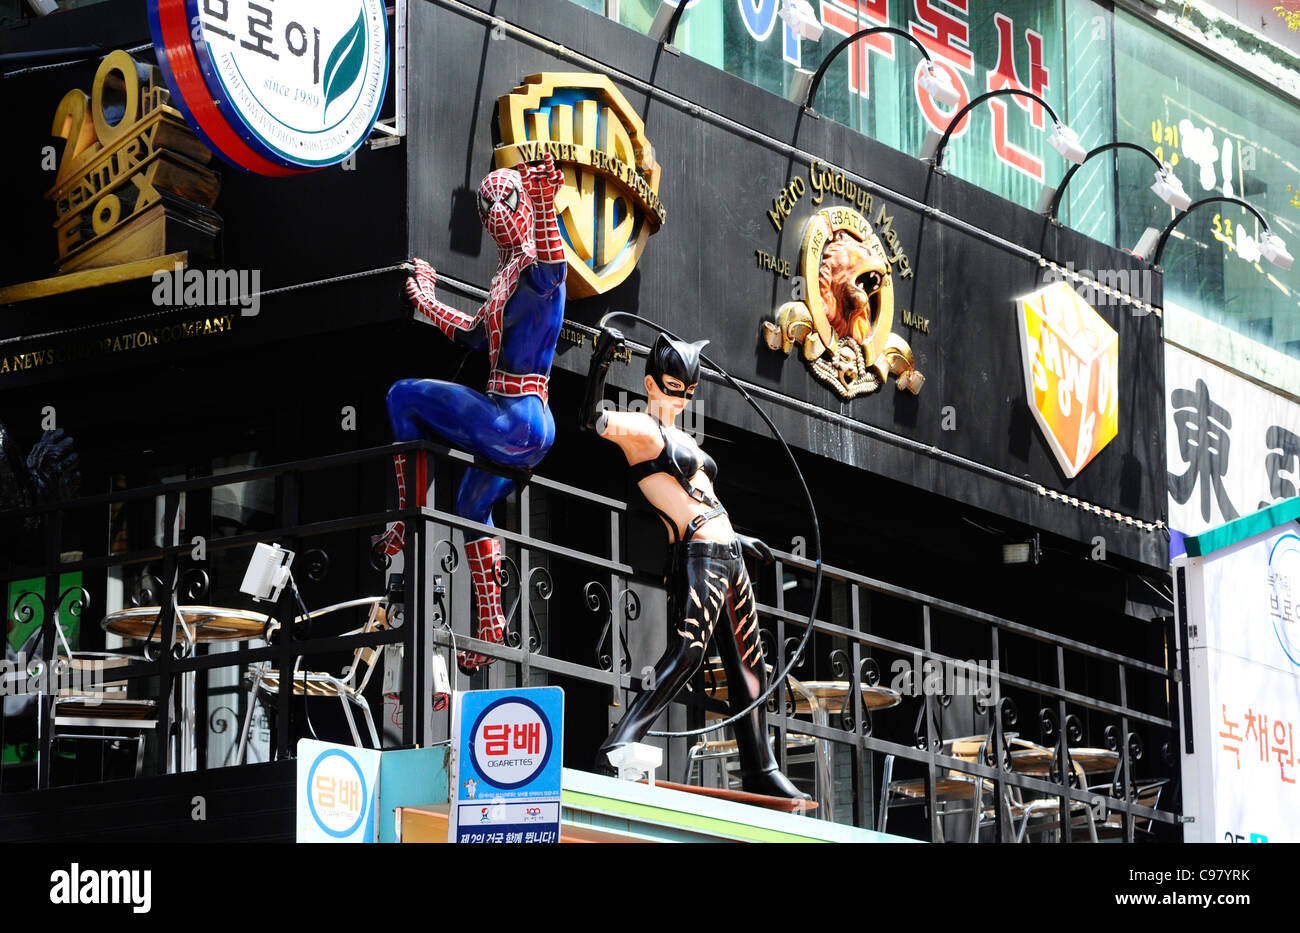 Spiderman and Catwoman in Busan, South Korea. Stock Photo